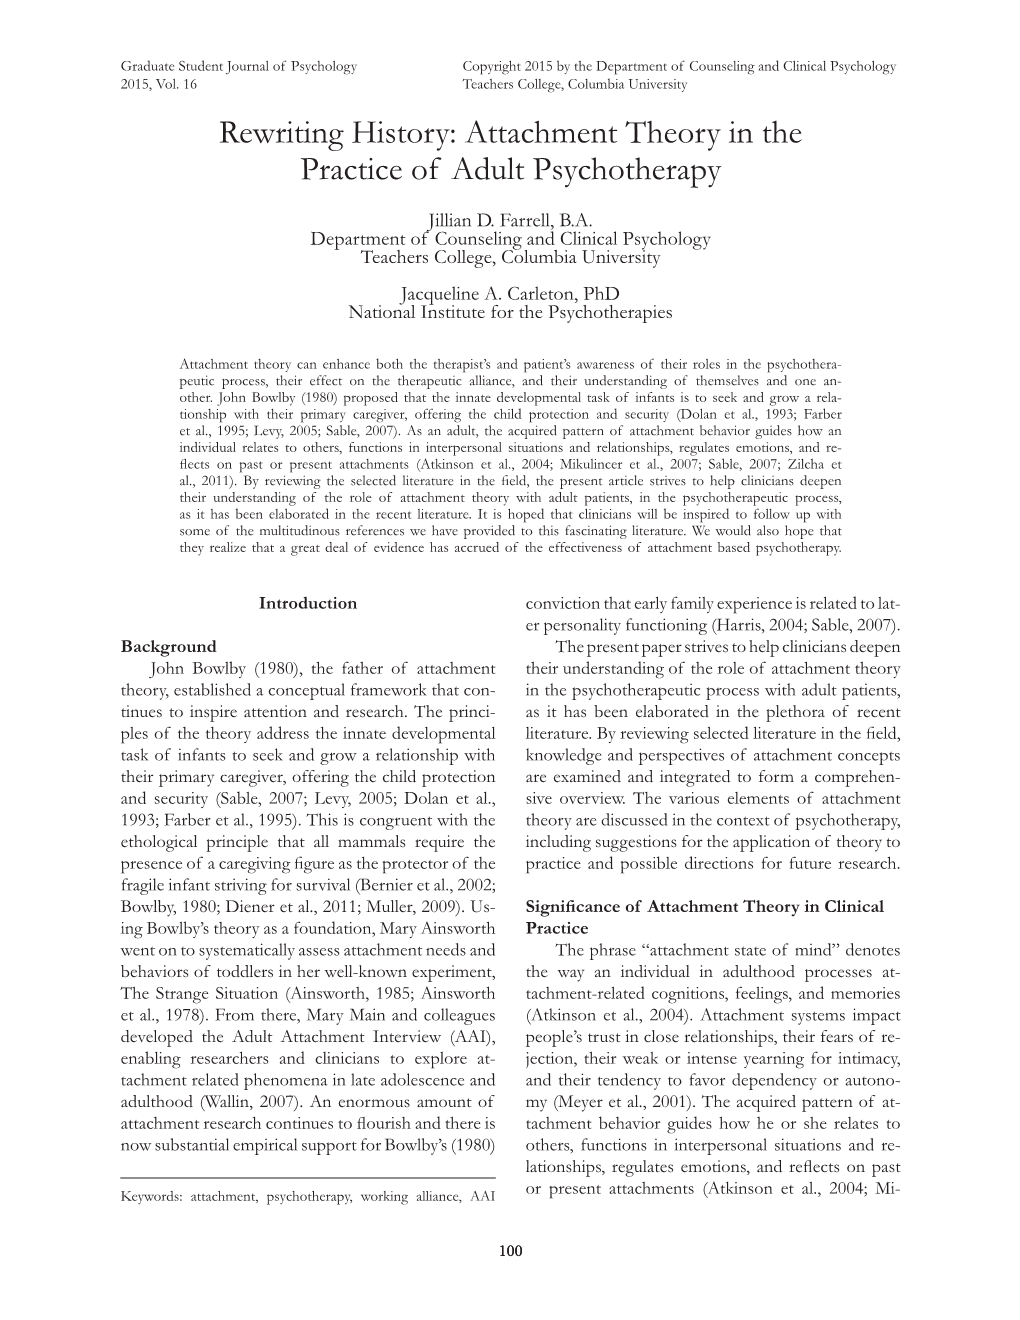 Rewriting History: Attachment Theory in the Practice of Adult Psychotherapy